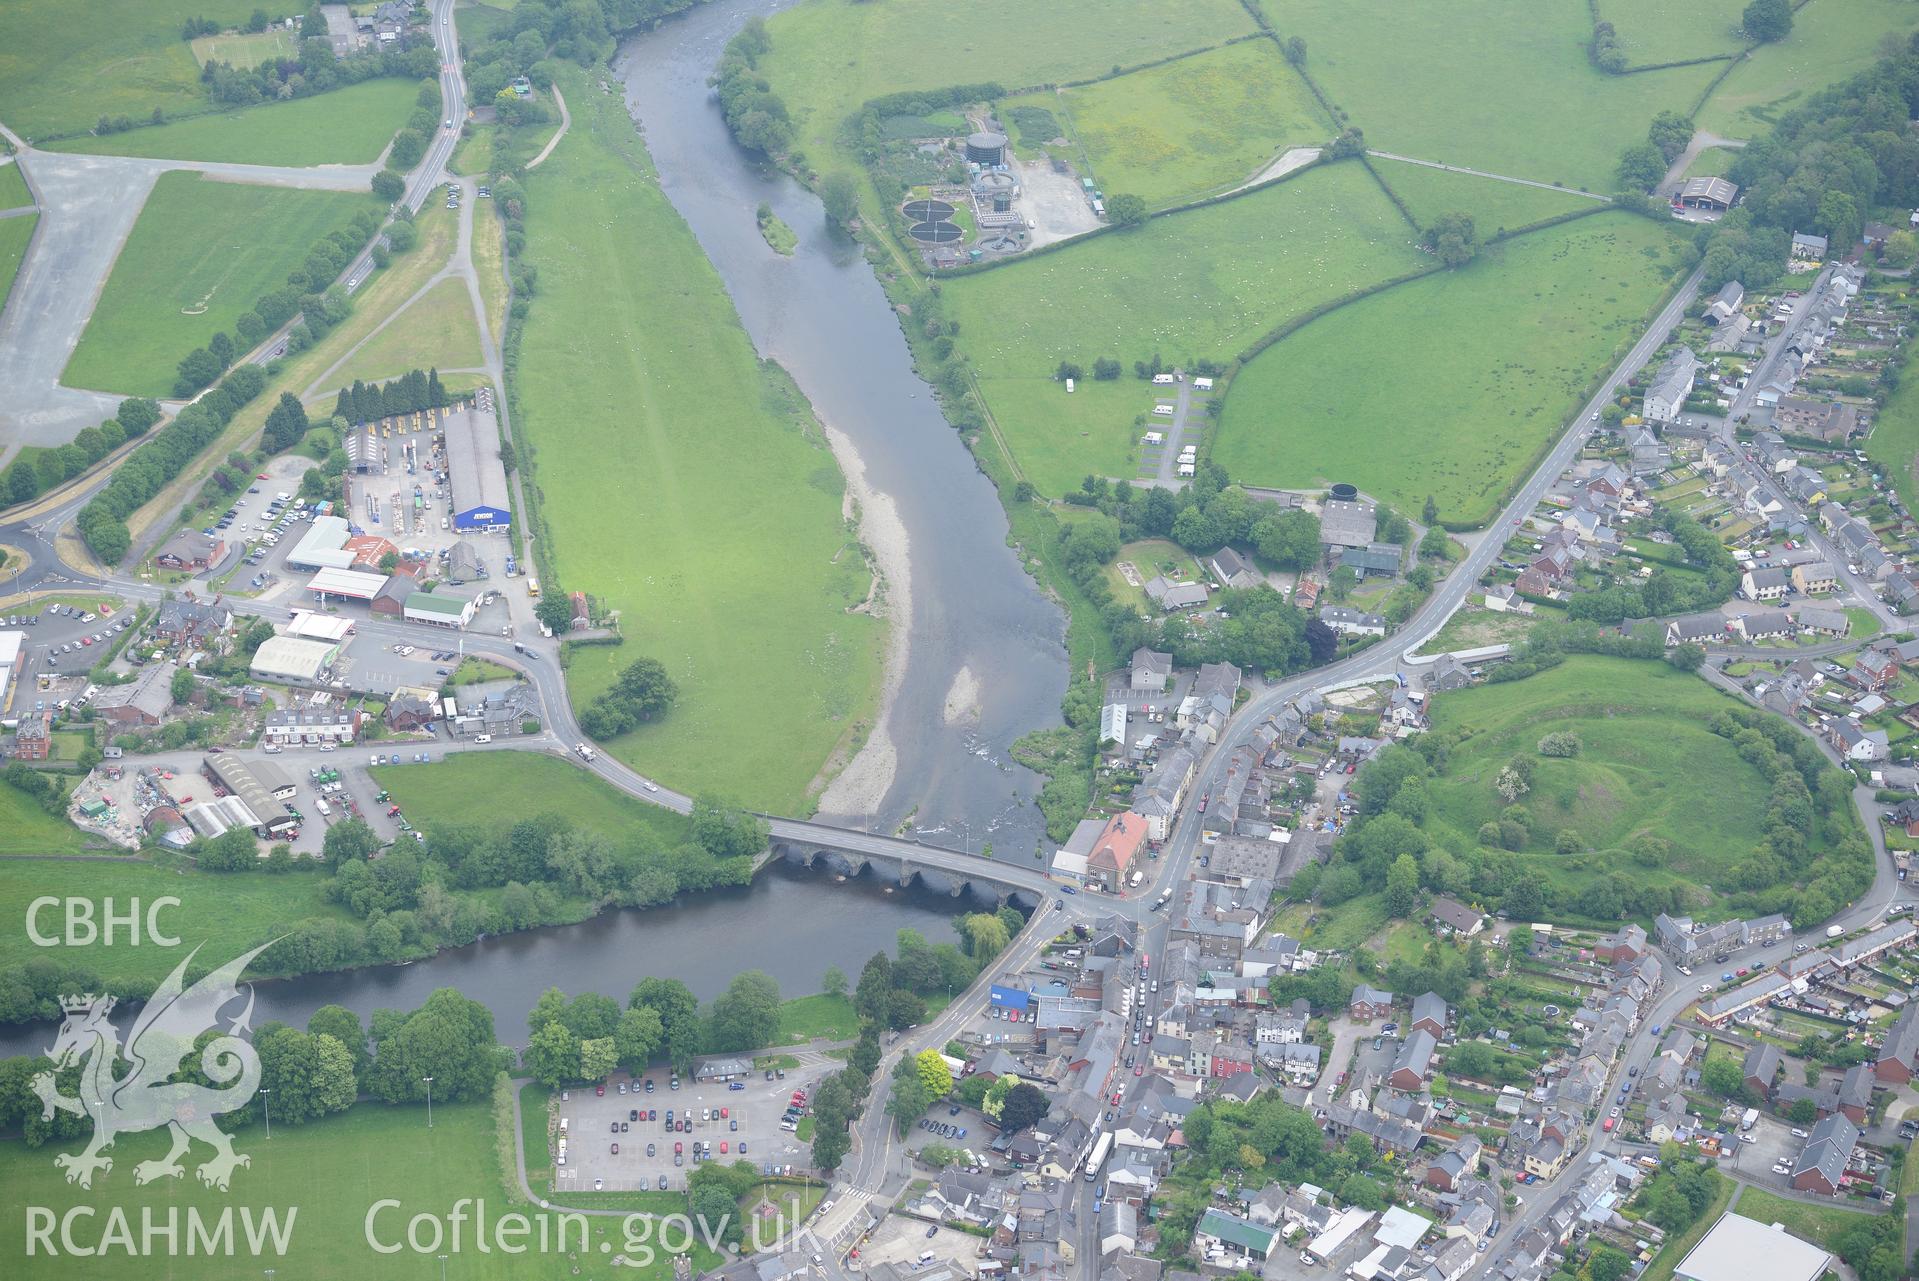 Builth Wells including views of Builth Castle, Builth Wells Market Hall and Builth bridge over the river Wye. Oblique aerial photograph taken during the Royal Commission?s programme of archaeological aerial reconnaissance by Toby Driver on 11th June 2015.